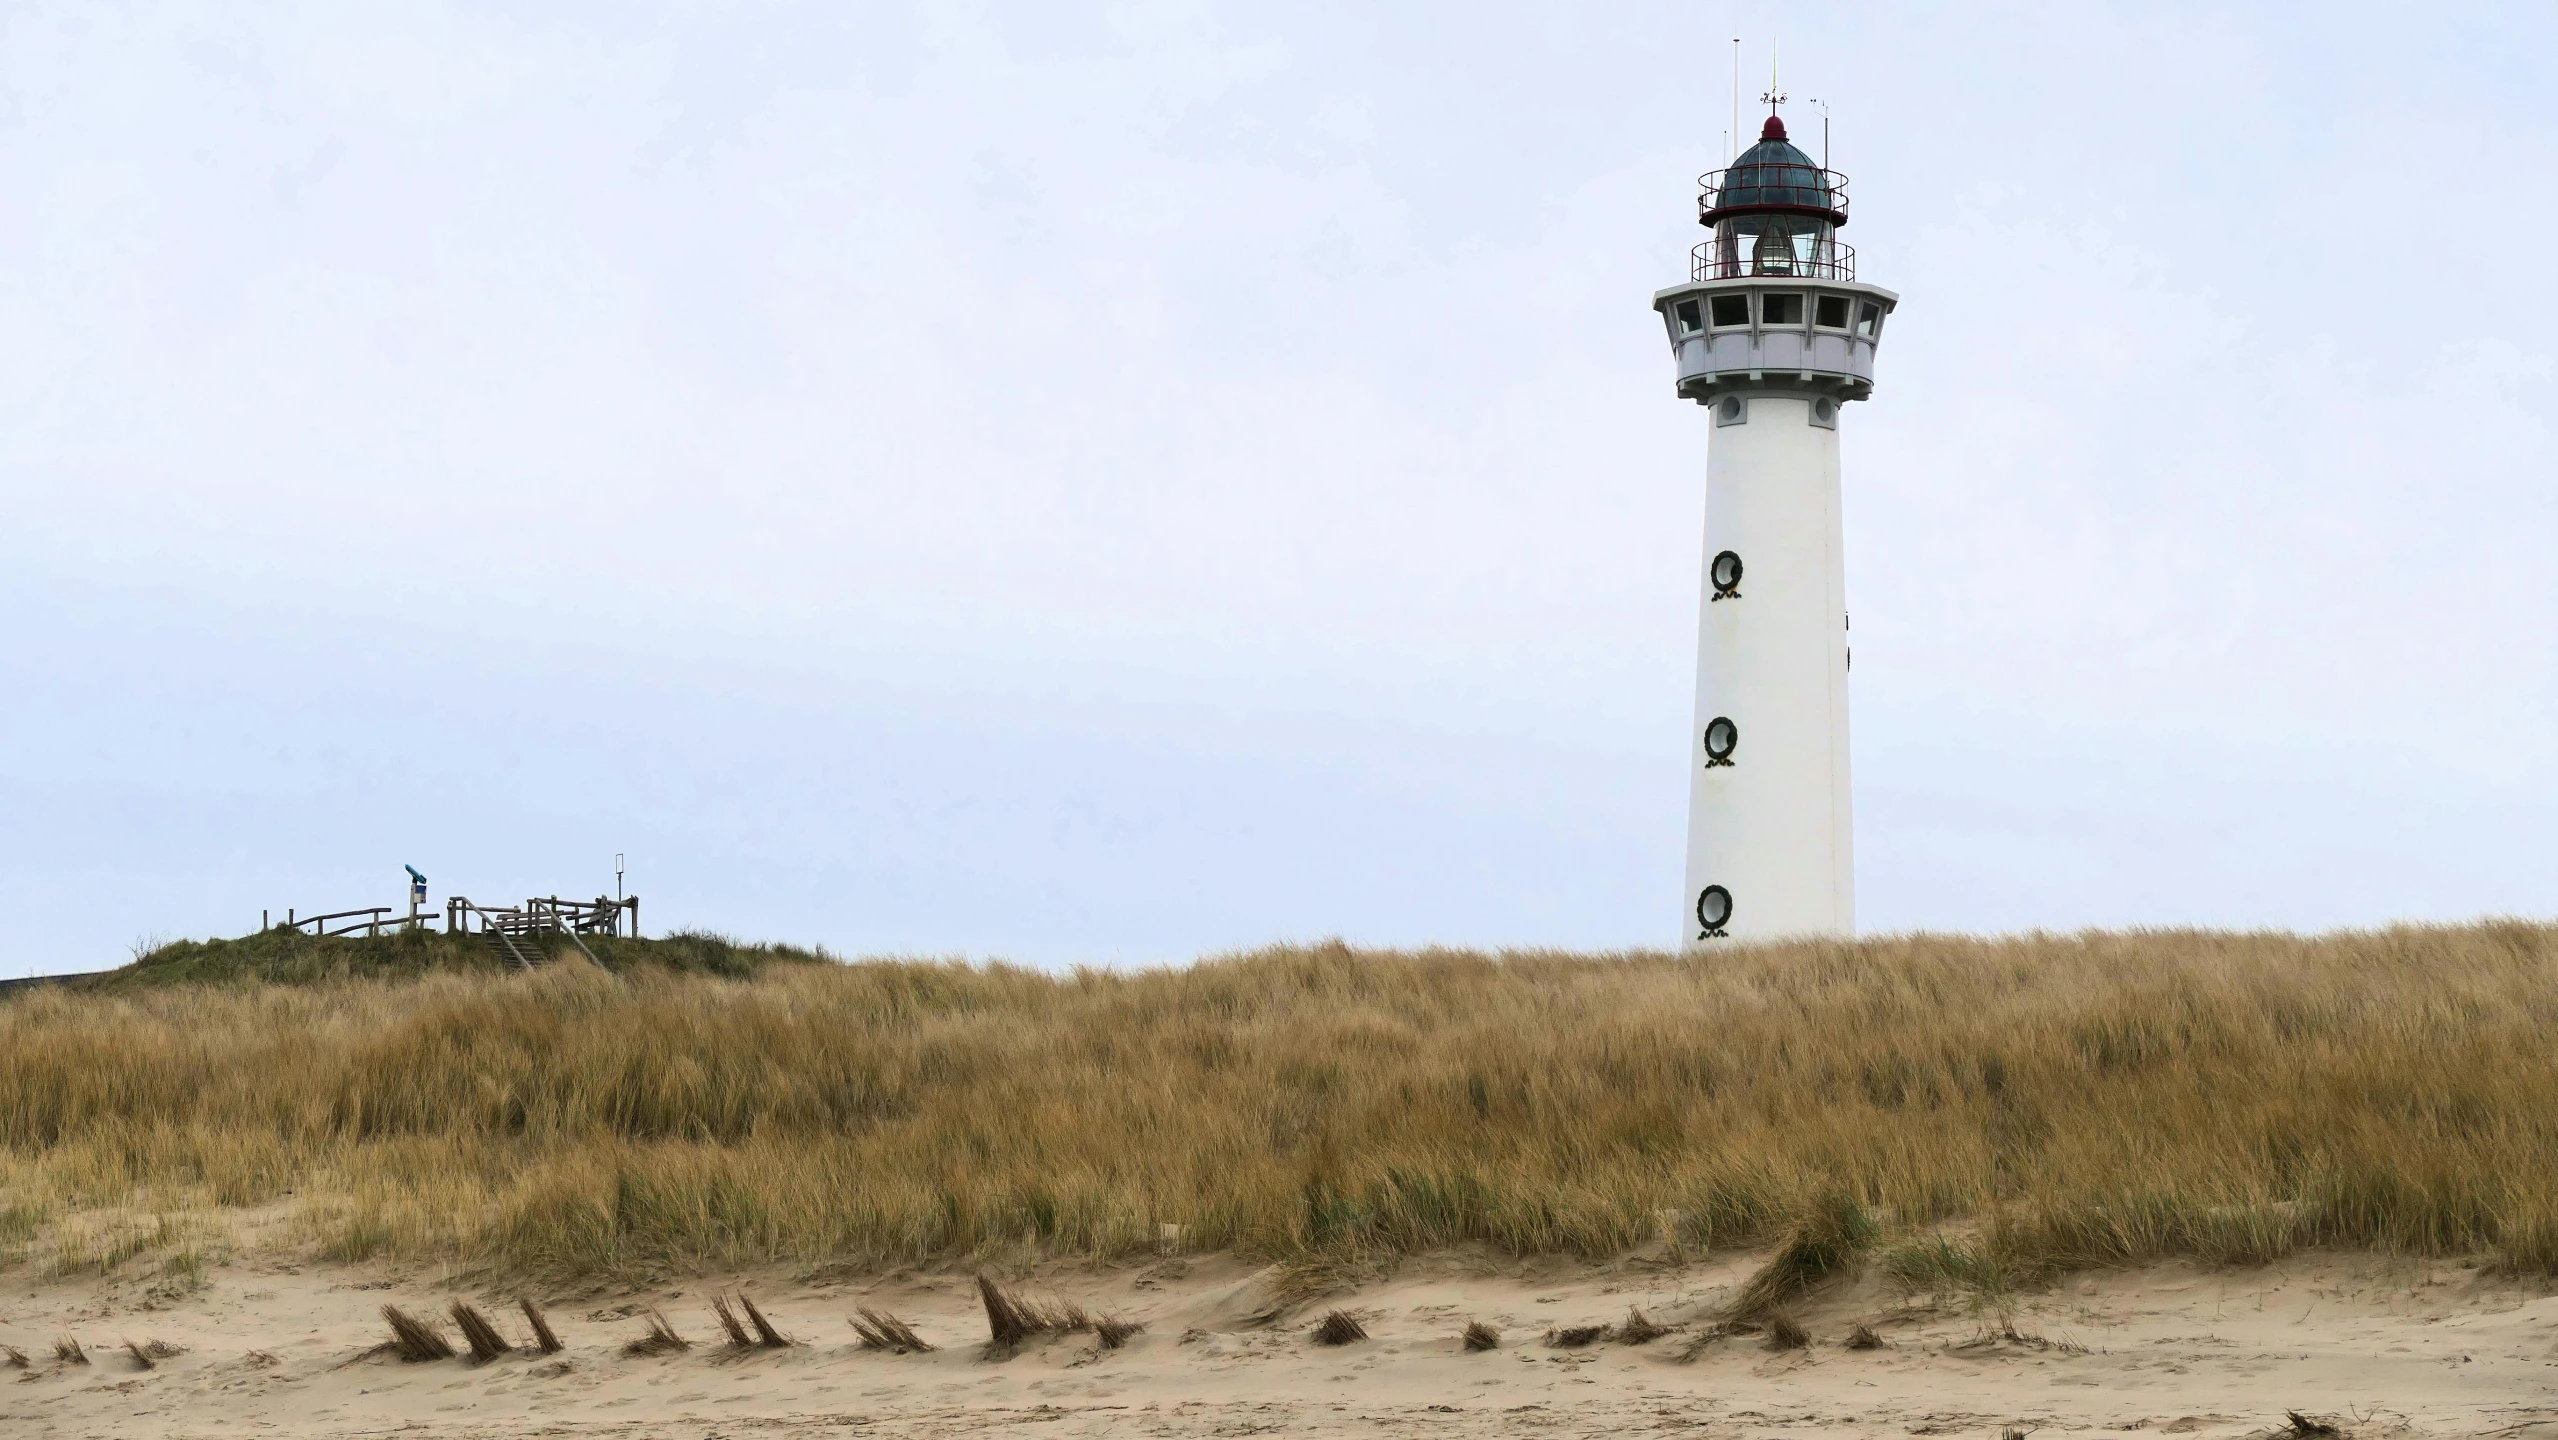 a lighthouse in the background and a dune in the foreground